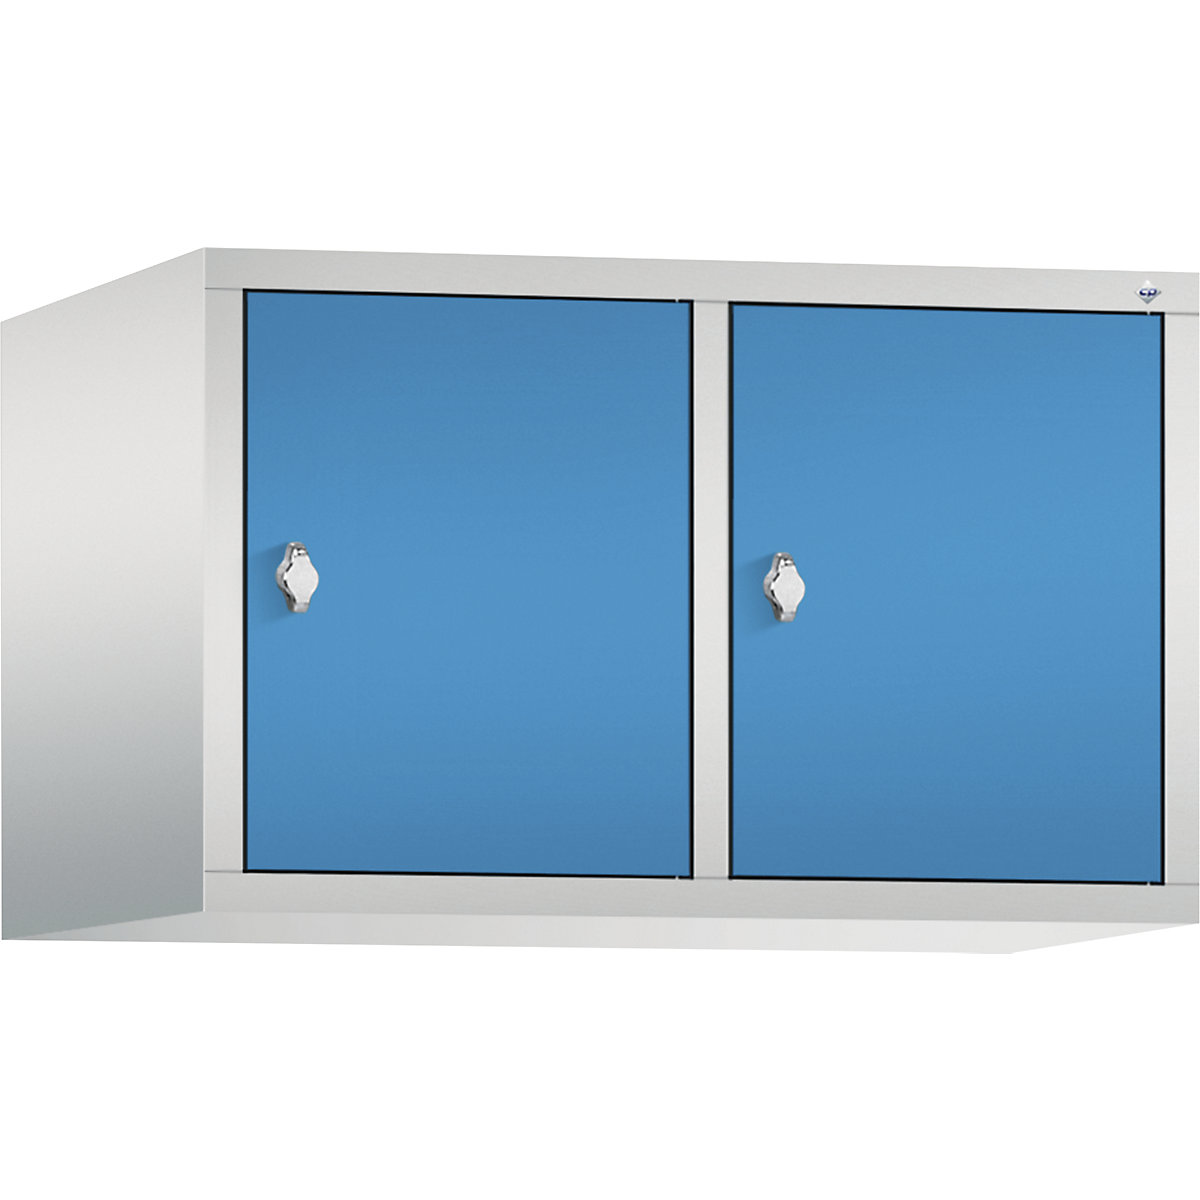 CLASSIC add-on cupboard – C+P, 2 compartments, compartment width 400 mm, light grey / light blue-11